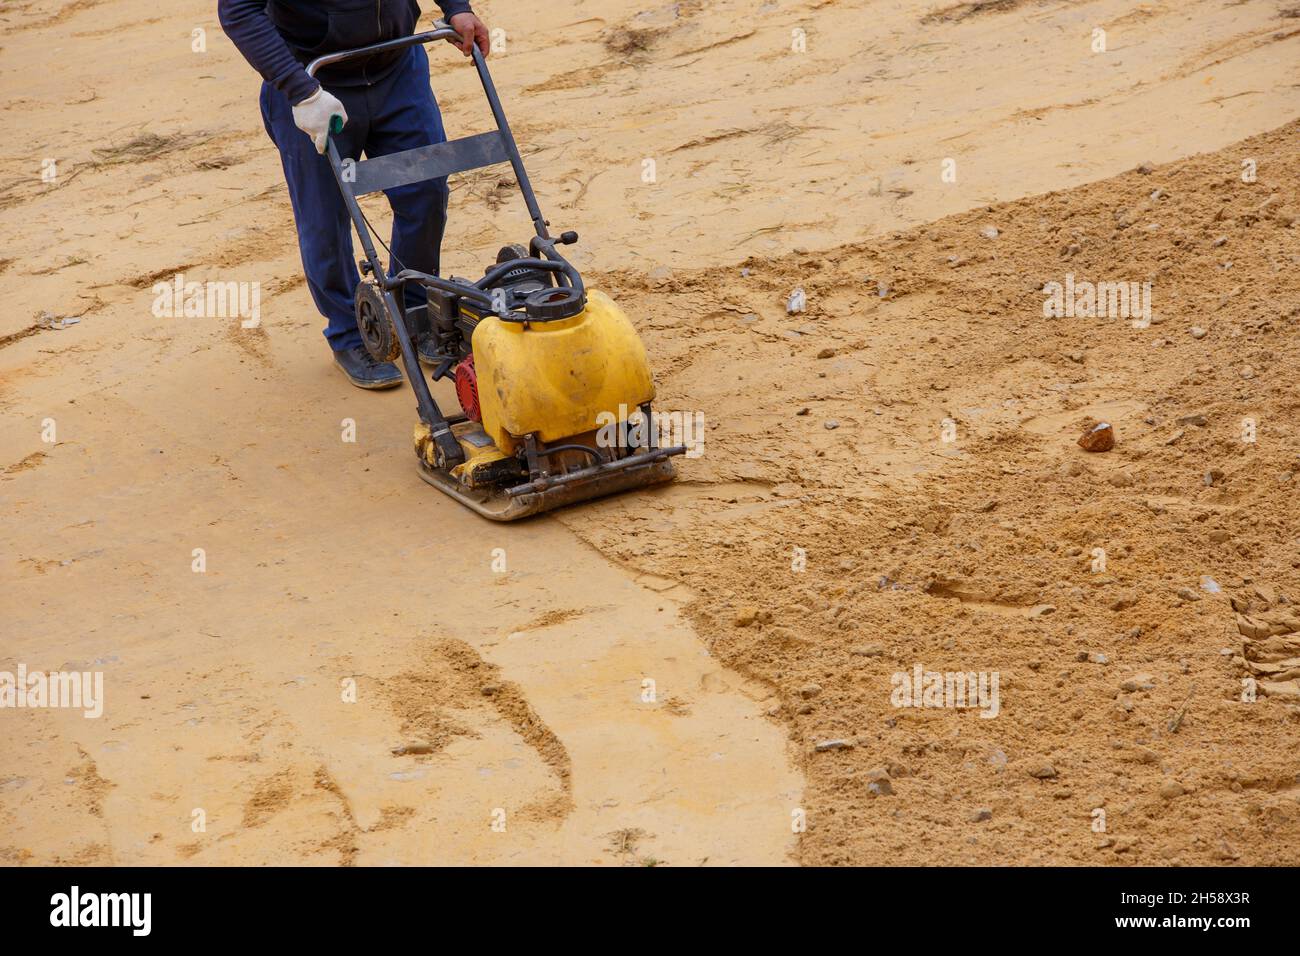 Worker in use vibratory plate compactor for compaction sand during